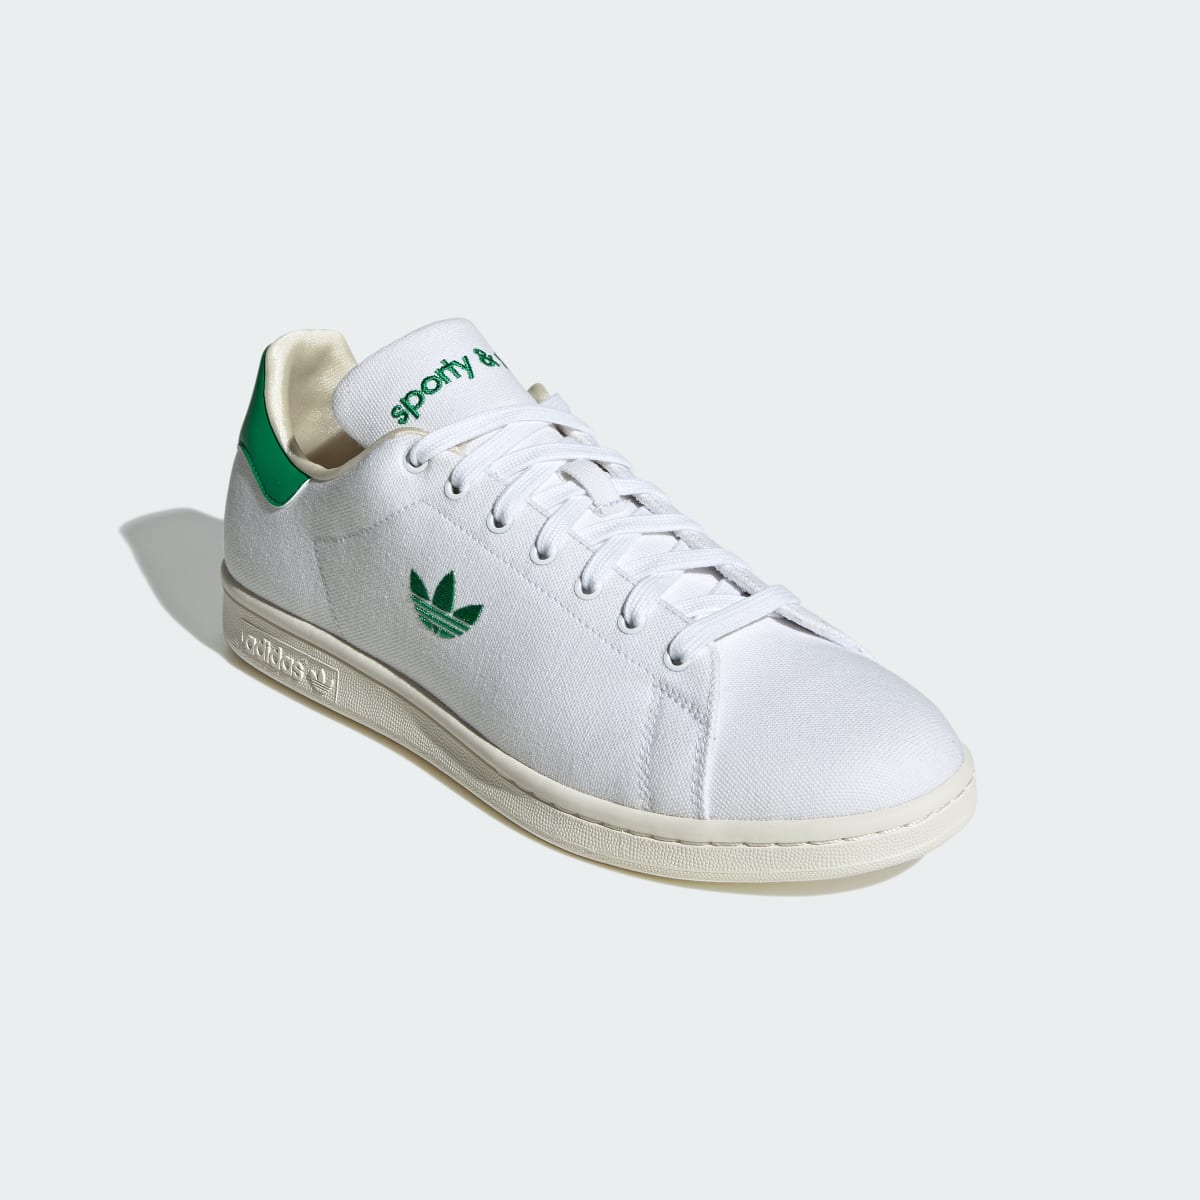 Adidas Stan Smith Sporty & Rich Shoes. 6